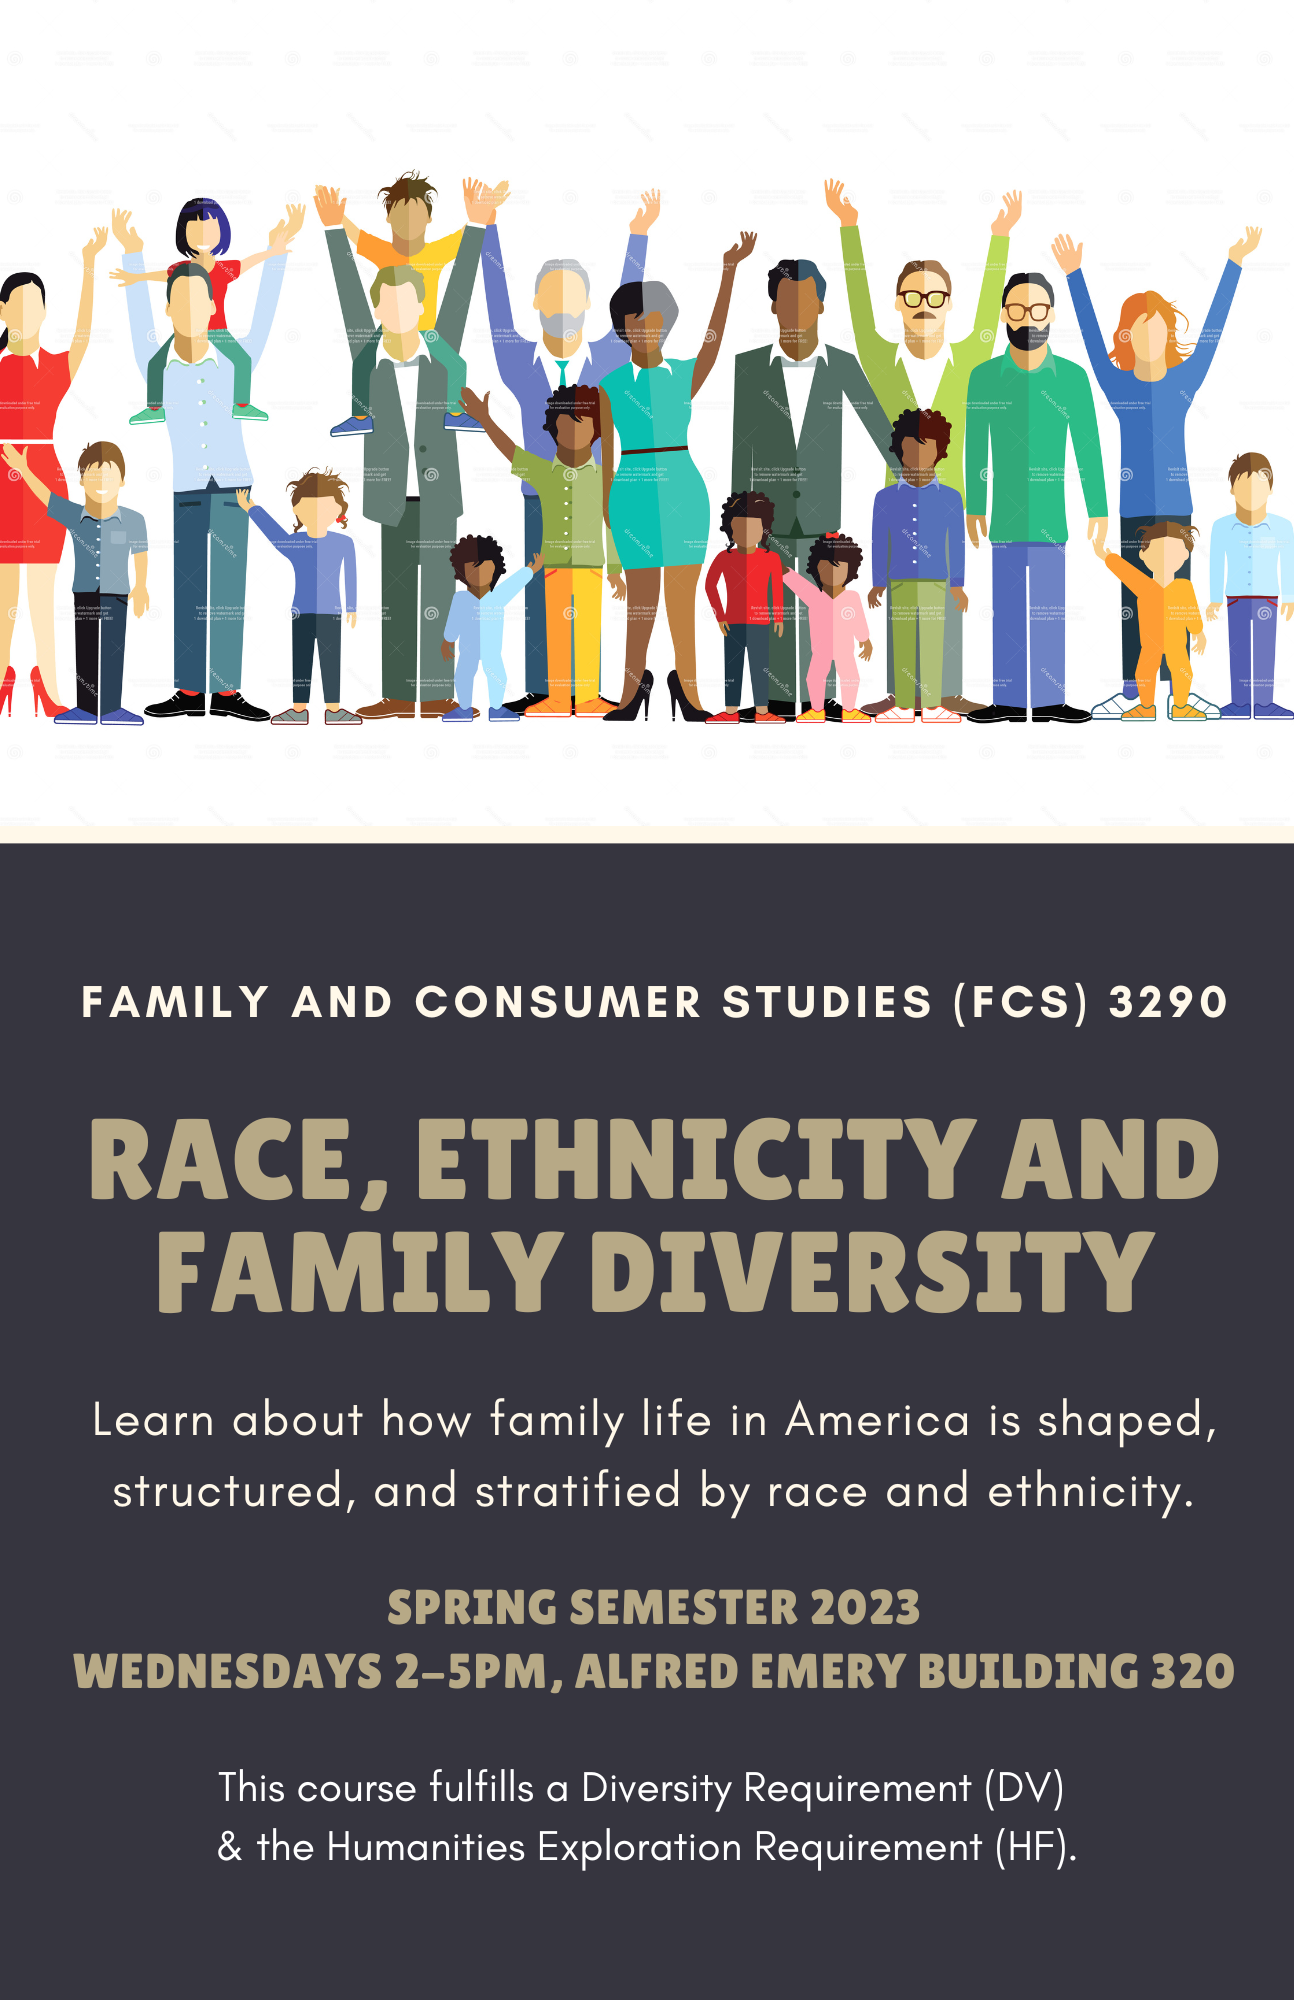 fcs 3290 race, ethnicity and family diversity